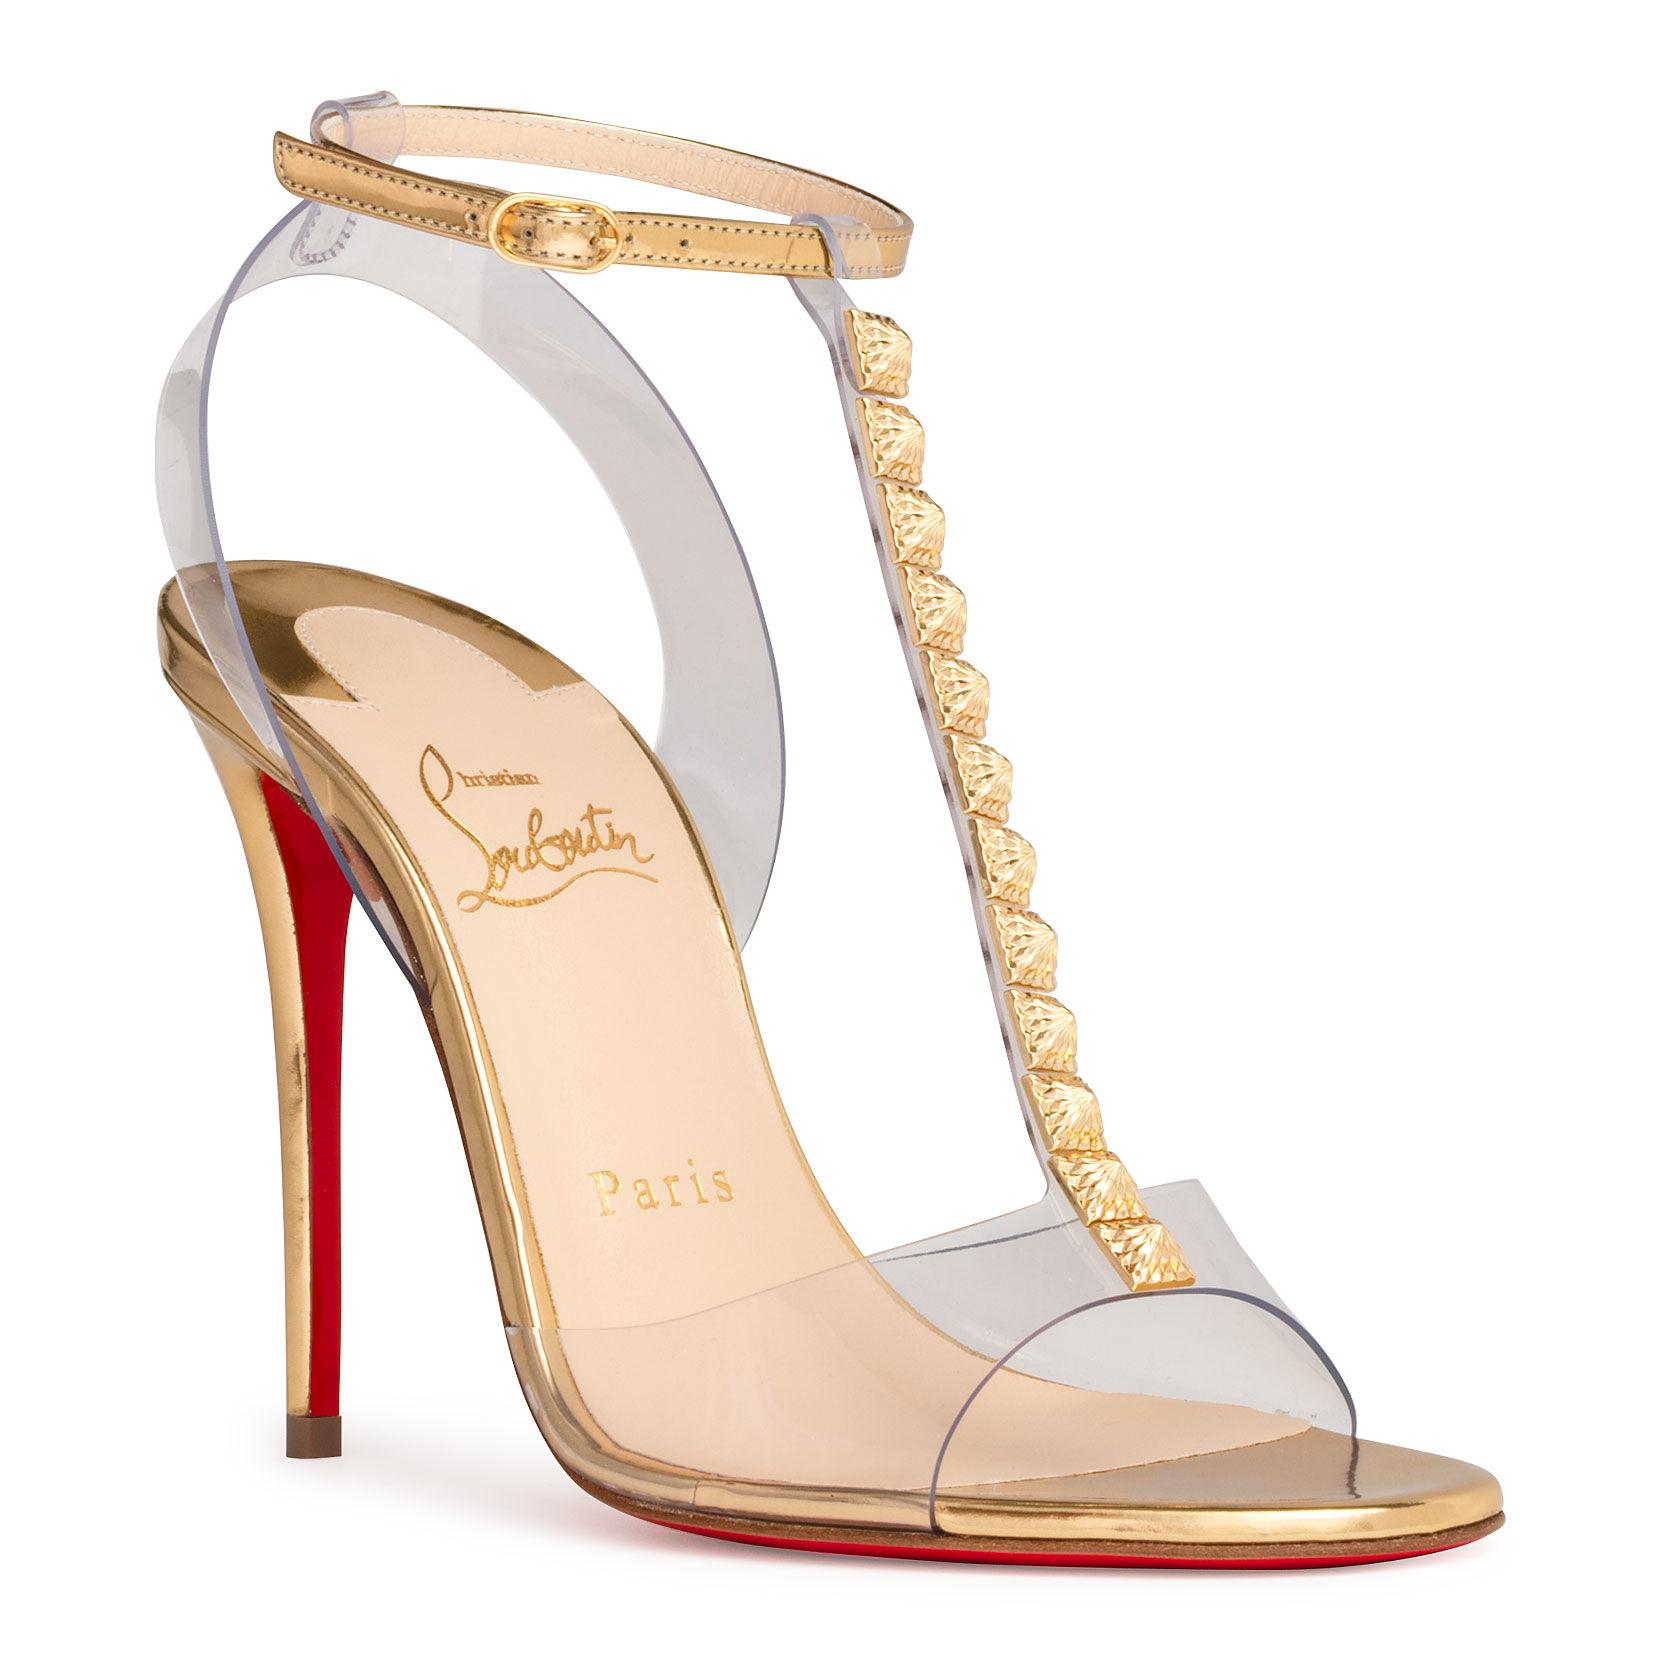 Lyst - Christian Louboutin Jamais Assez 100 Pvc And Gold Sandals in ...